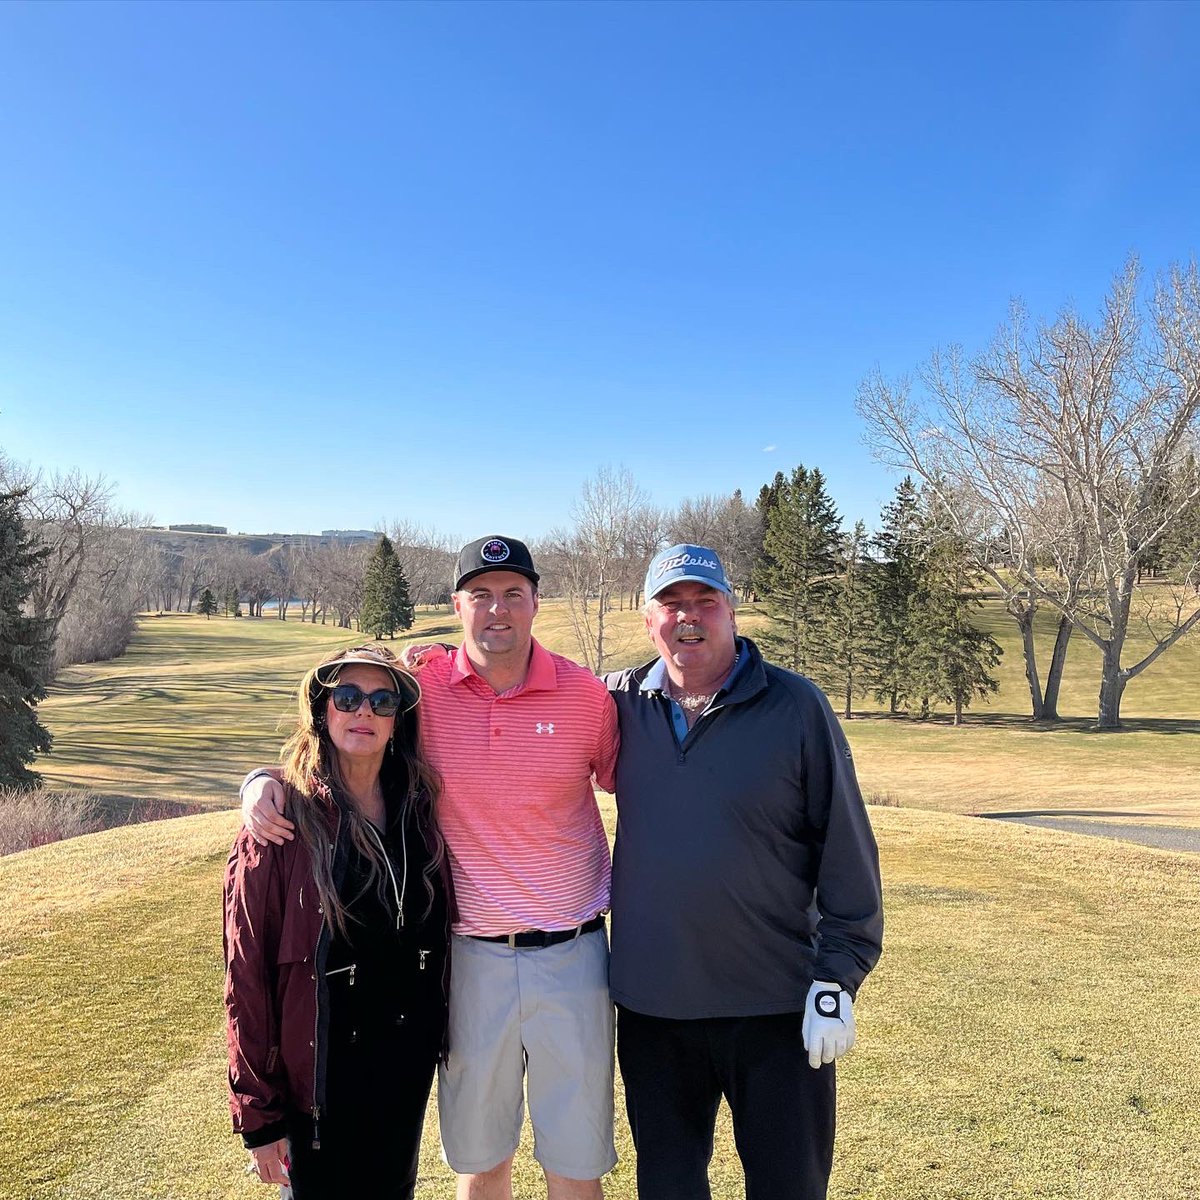 Had the pleasure of golfing with Tim and Sharla Hirsche on the four year anniversary of their son Brock’s passing. An incredible family. I miss their son every day and will never have a friend like Brock was. A captain on the ice but most certainly off the ice as well #BH10